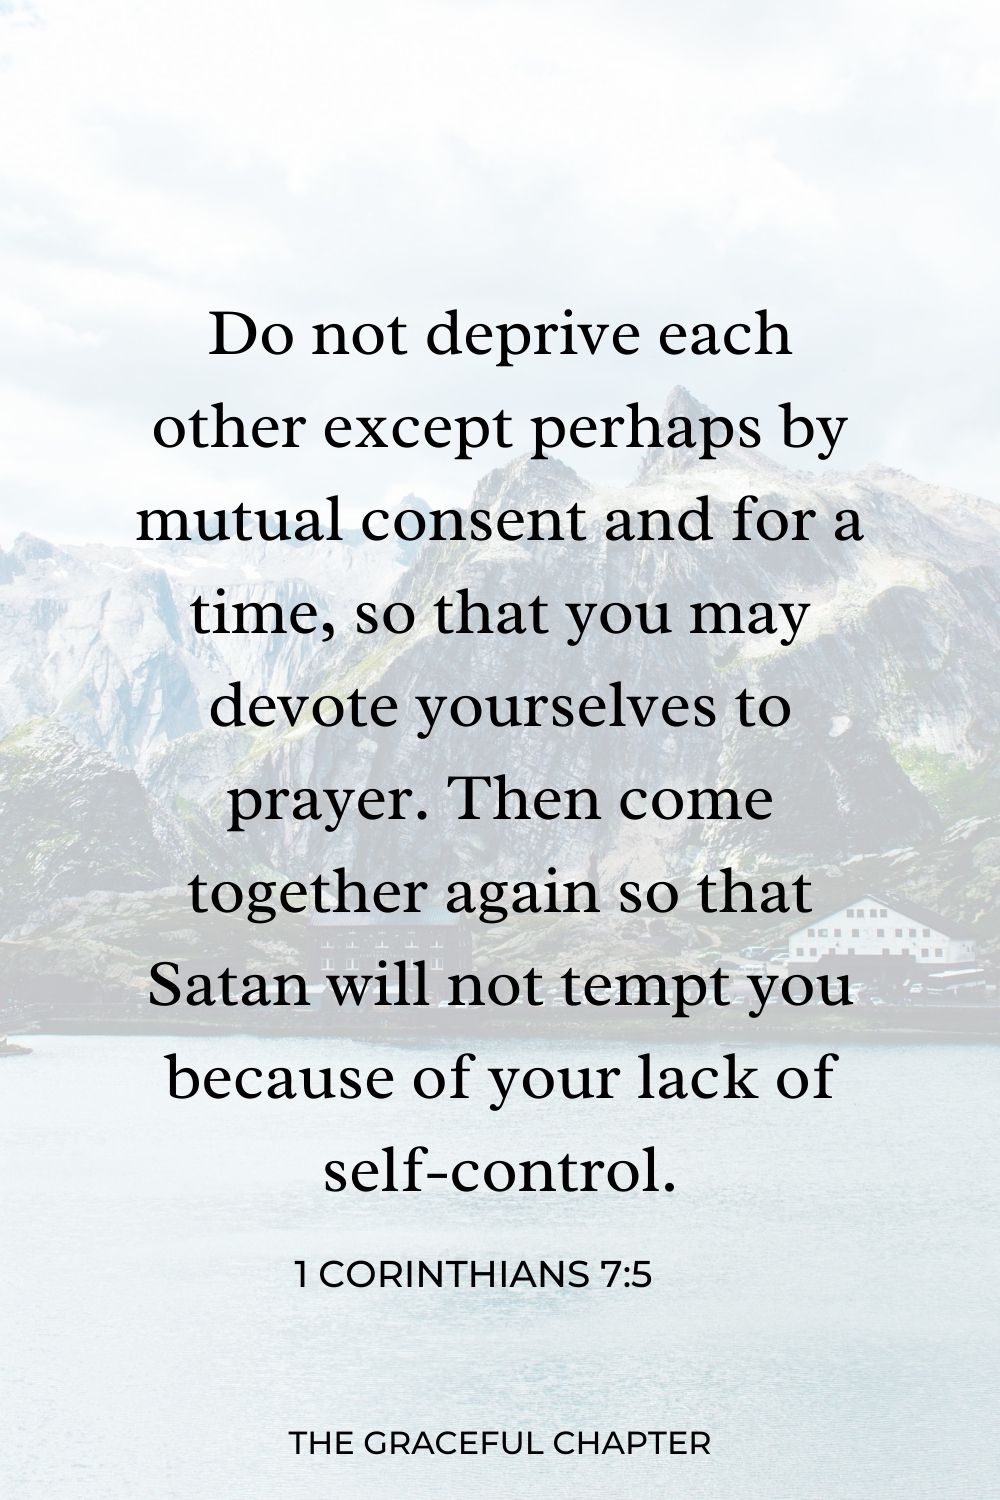 Do not deprive each other except perhaps by mutual consent and for a time, so that you may devote yourselves to prayer. Then come together again so that Satan will not tempt you because of your lack of self-control. 1 Corinthians 7:5